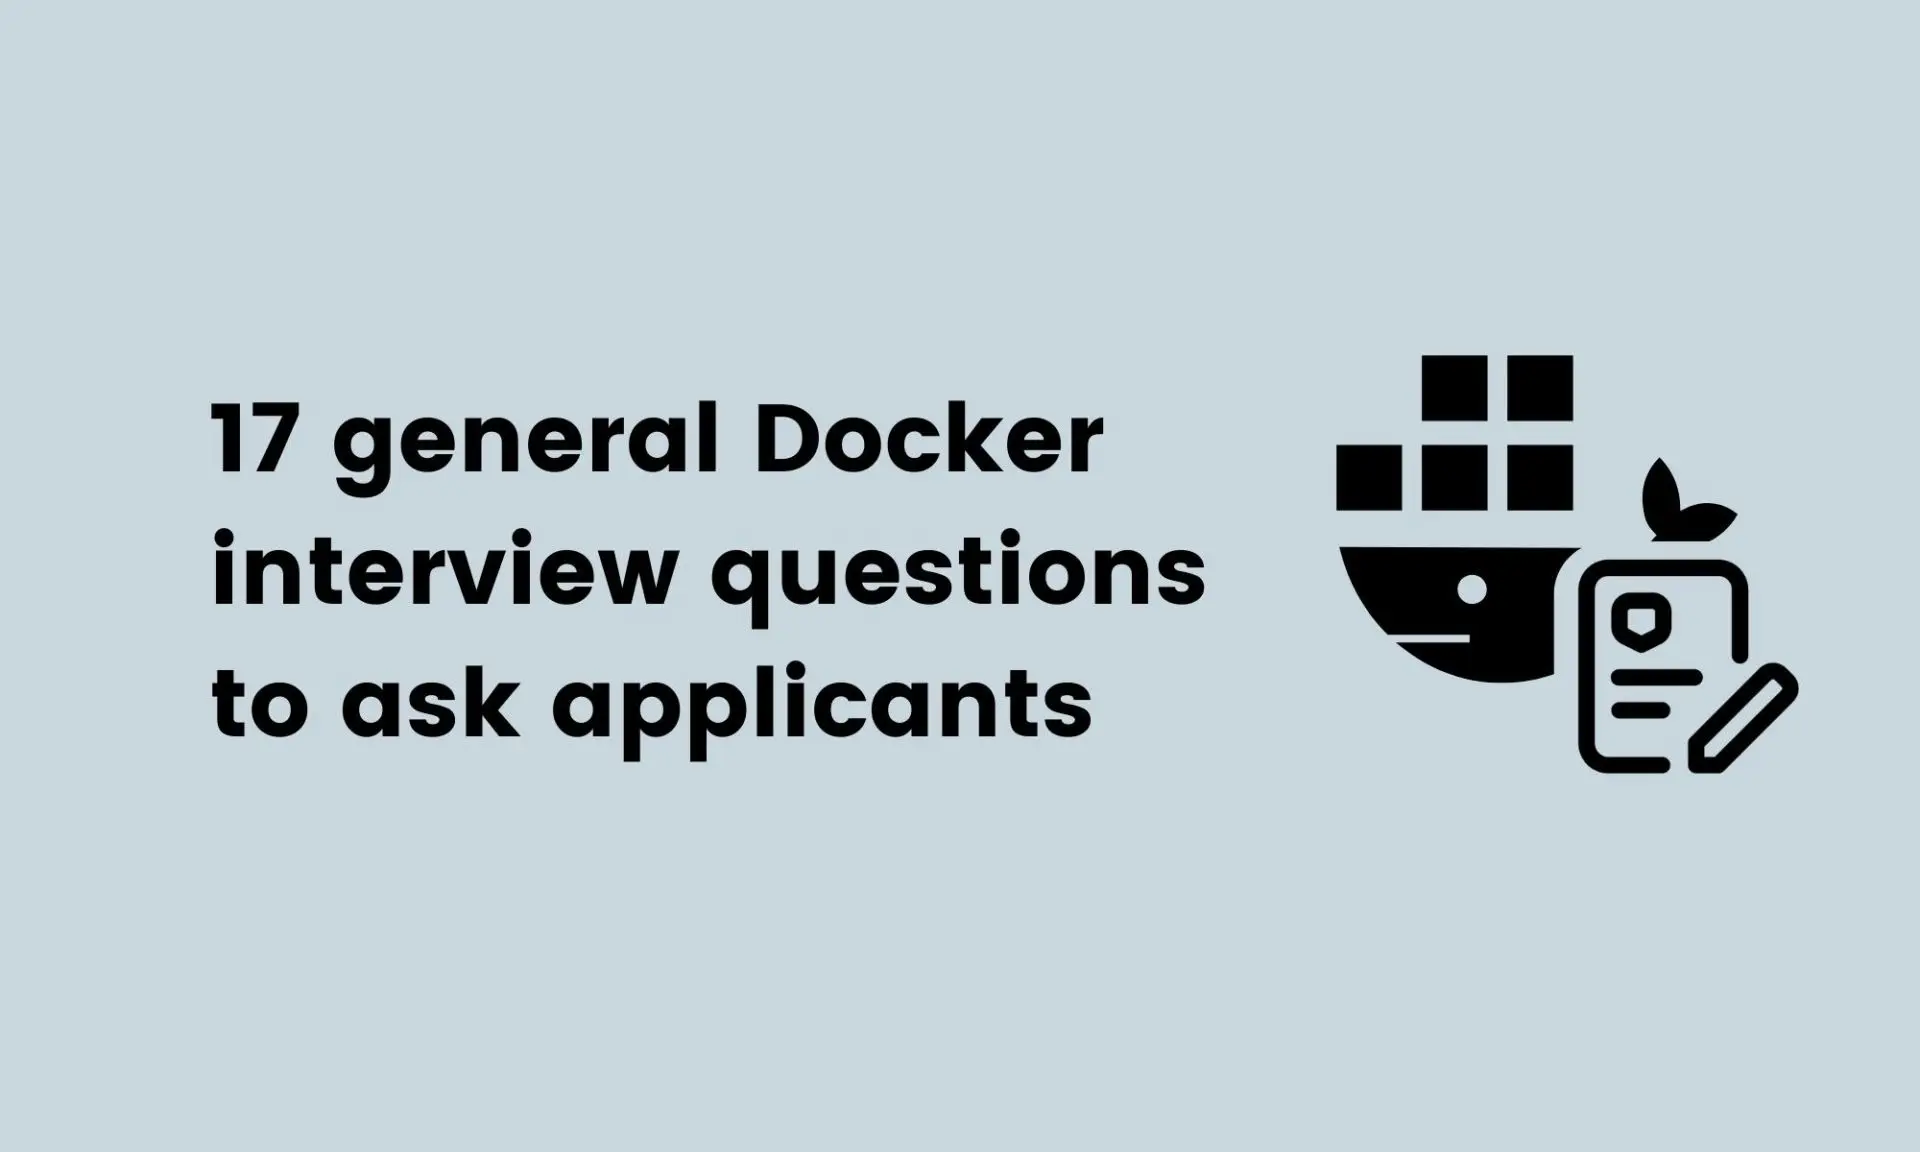 general Docker interview questions to ask applicants